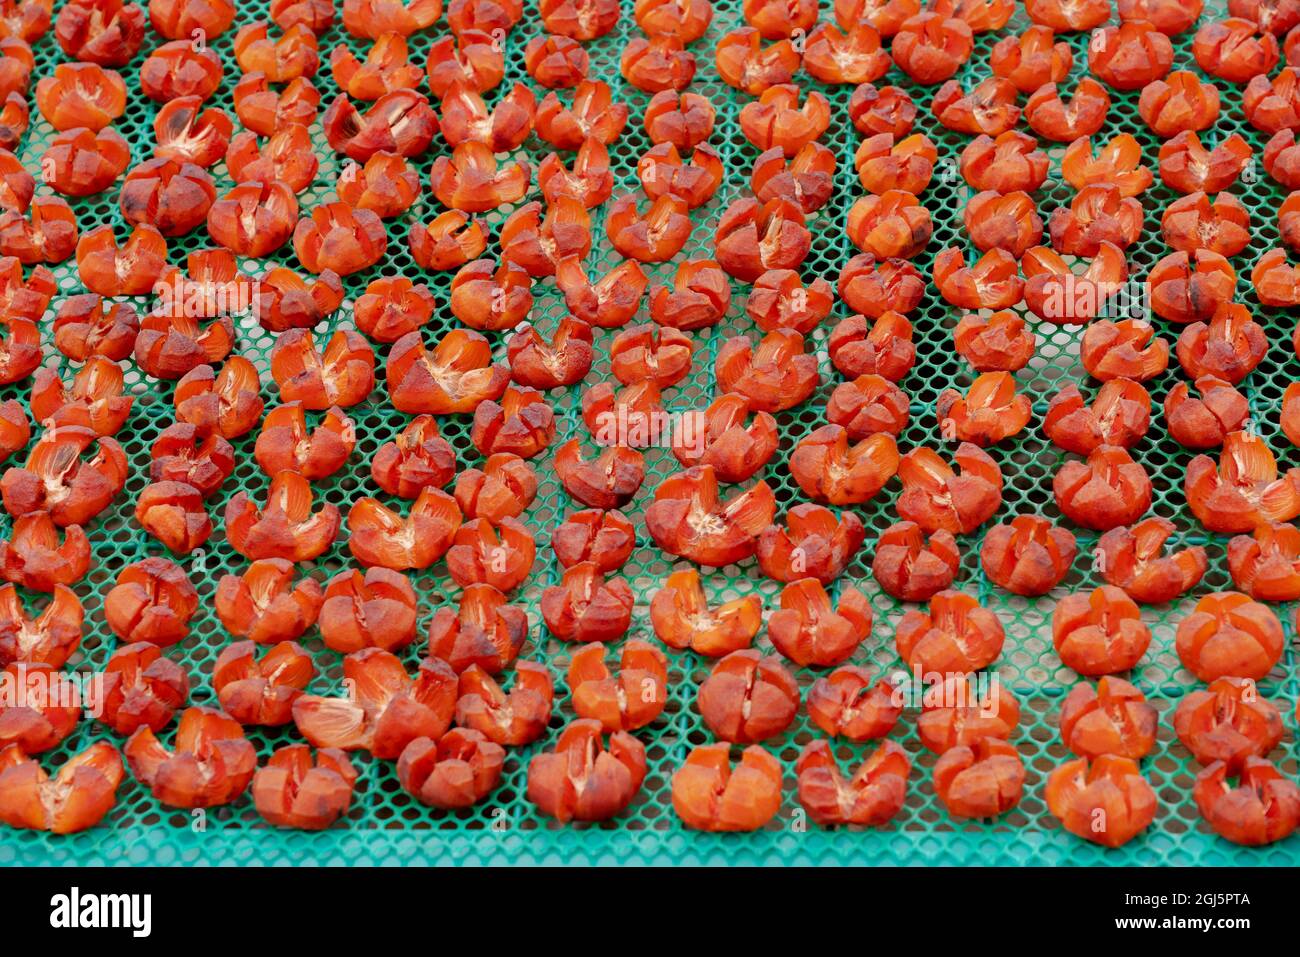 China, Fujian Province, Yongding County, Yongding Tulou. Persimmons are drying on a rack. Stock Photo